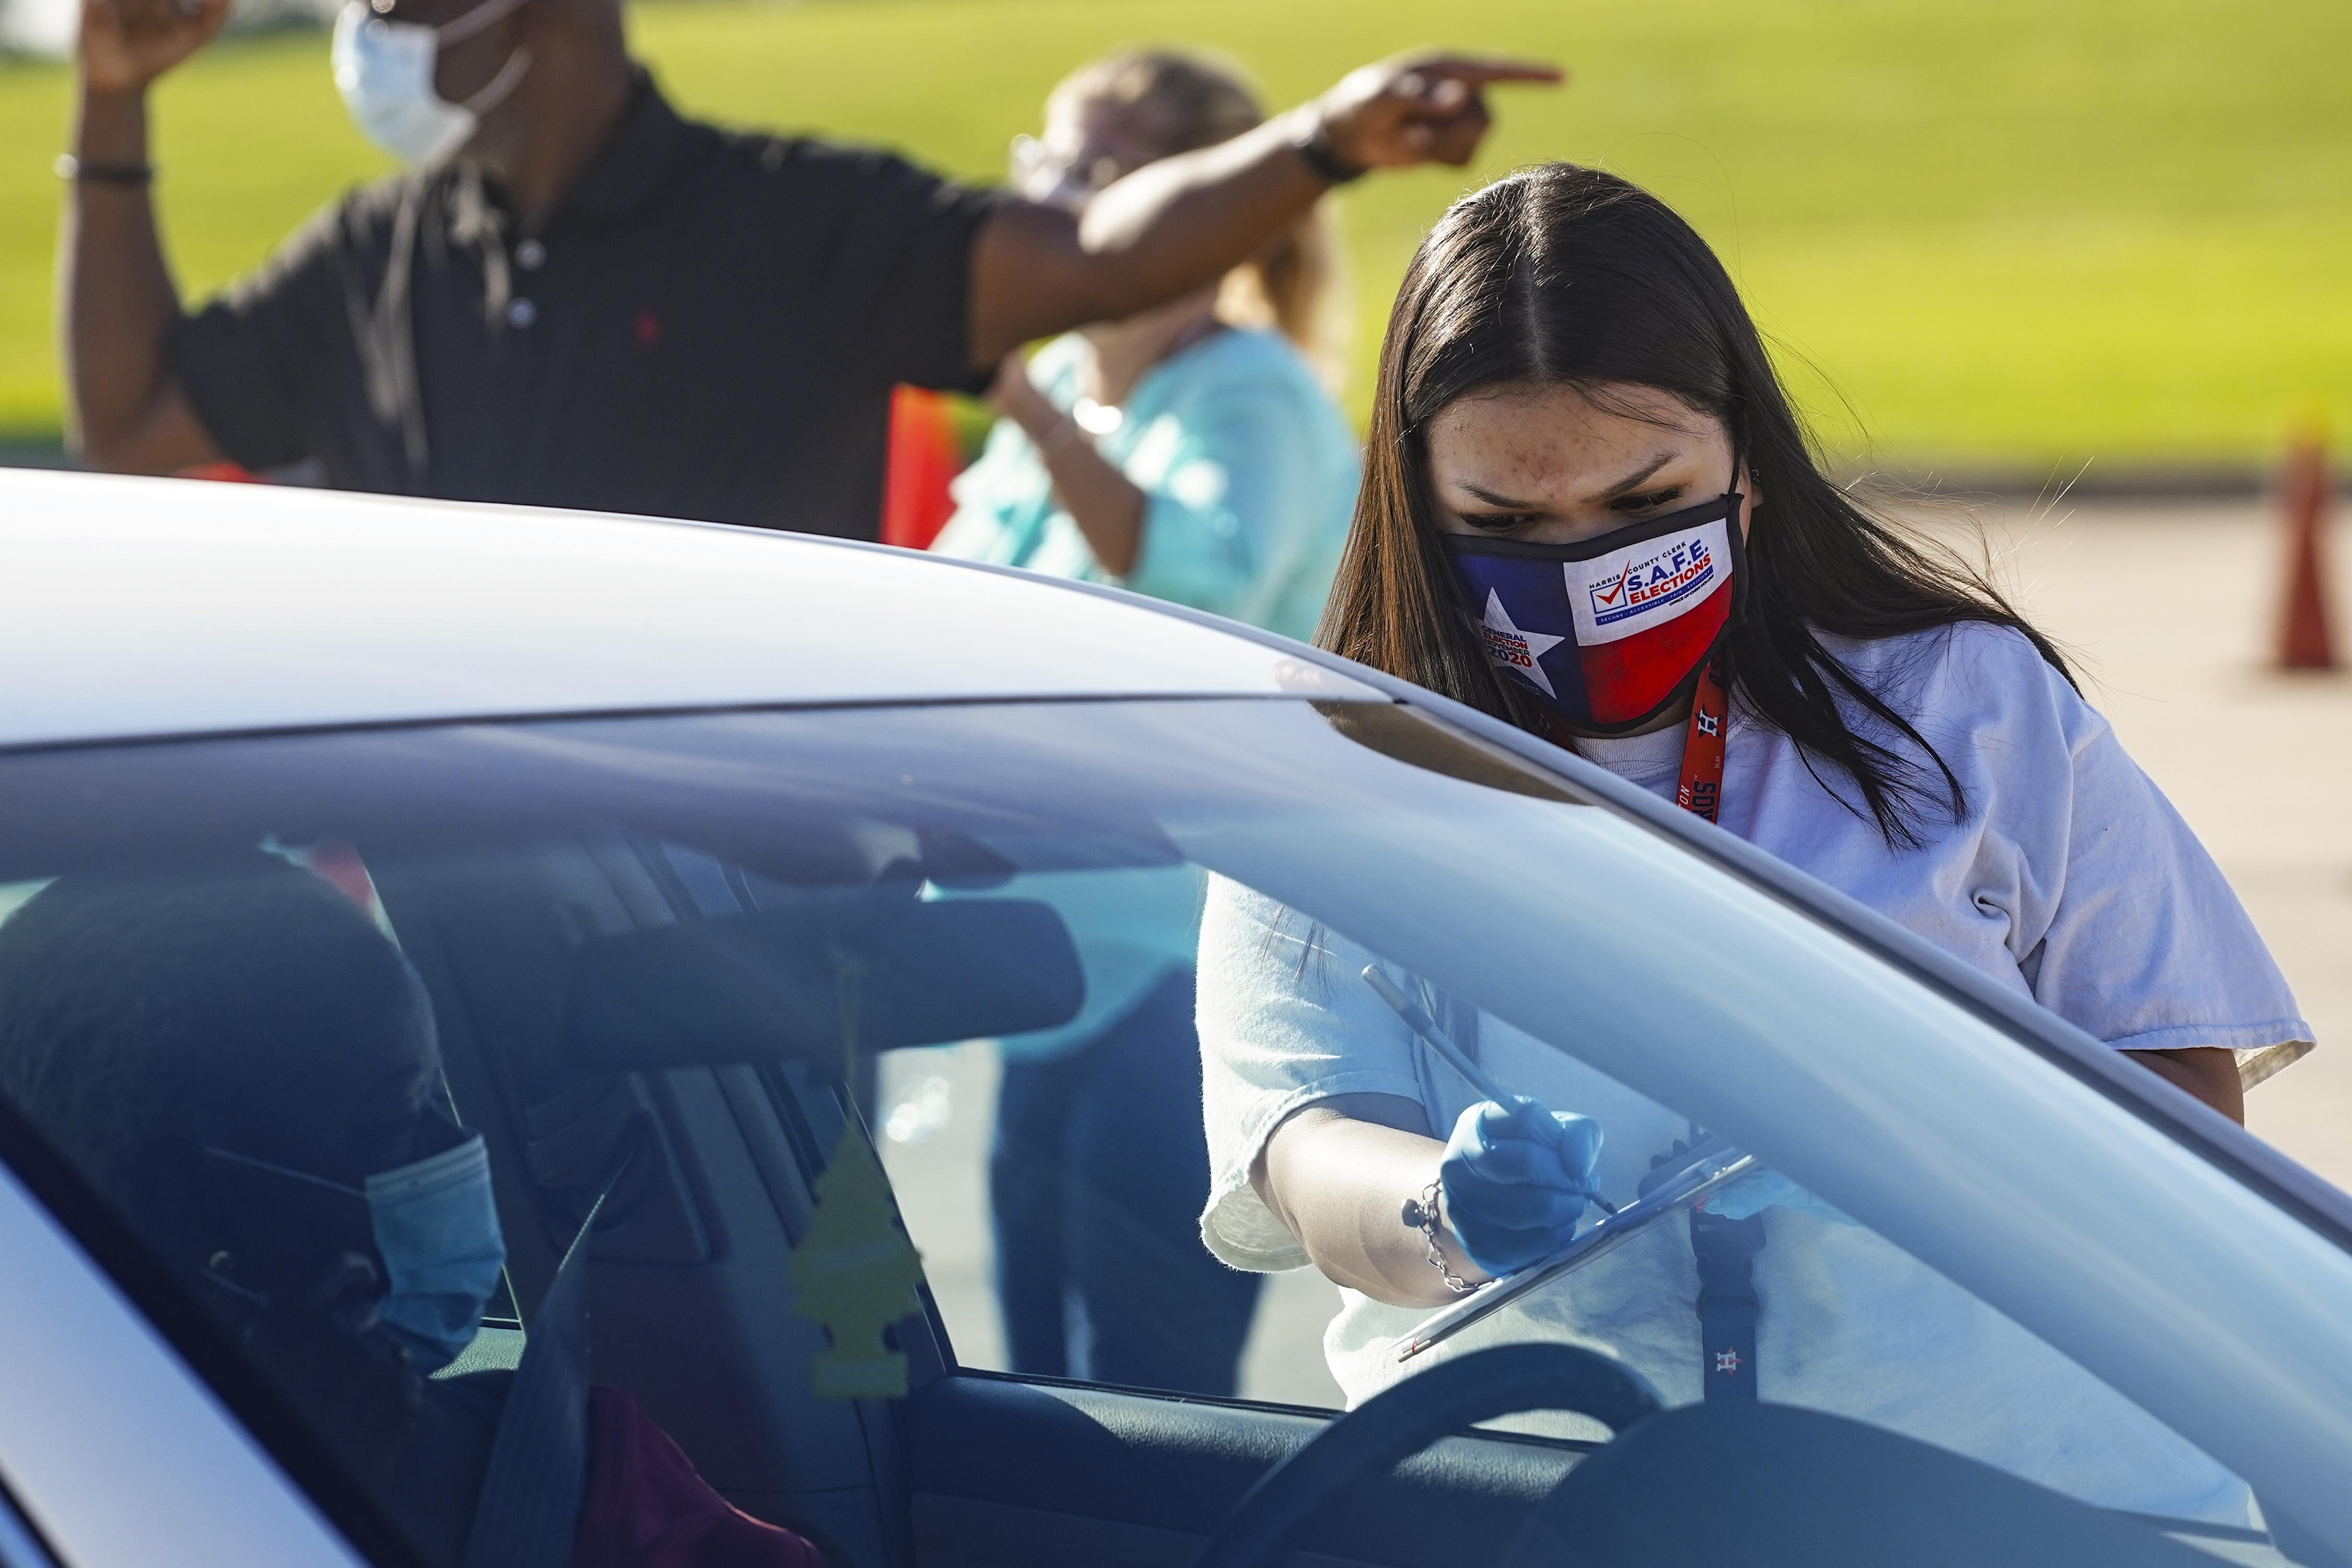 An election worker accepts mail in ballot from a voter at drive-through mail ballot drop off site at NRG Stadium on Oct. 7, 2020 in Houston, Texas. 